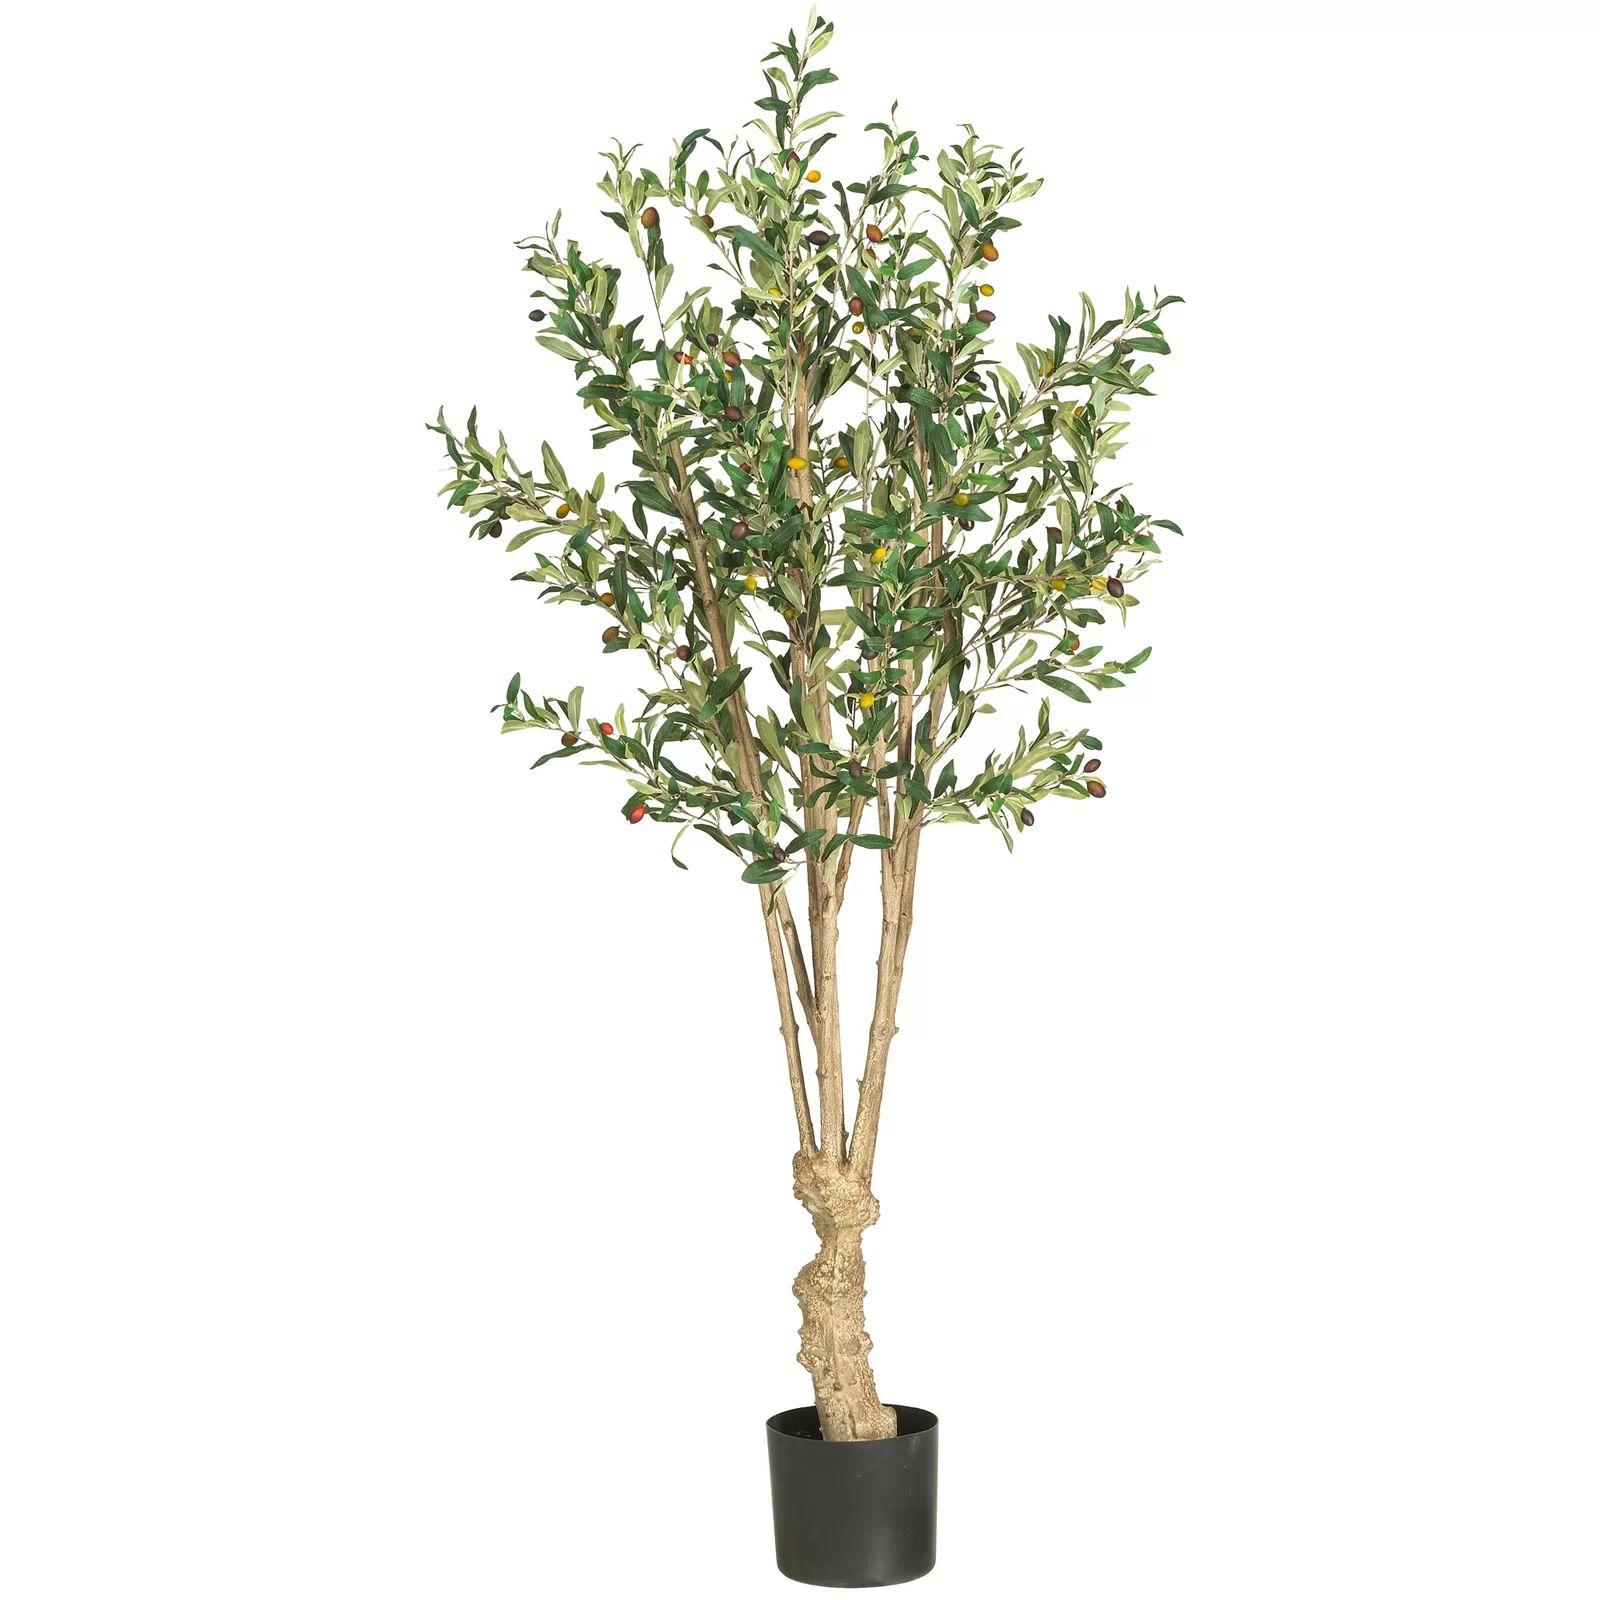 54" Artificial Olive Tree in Pot | Wayfair North America